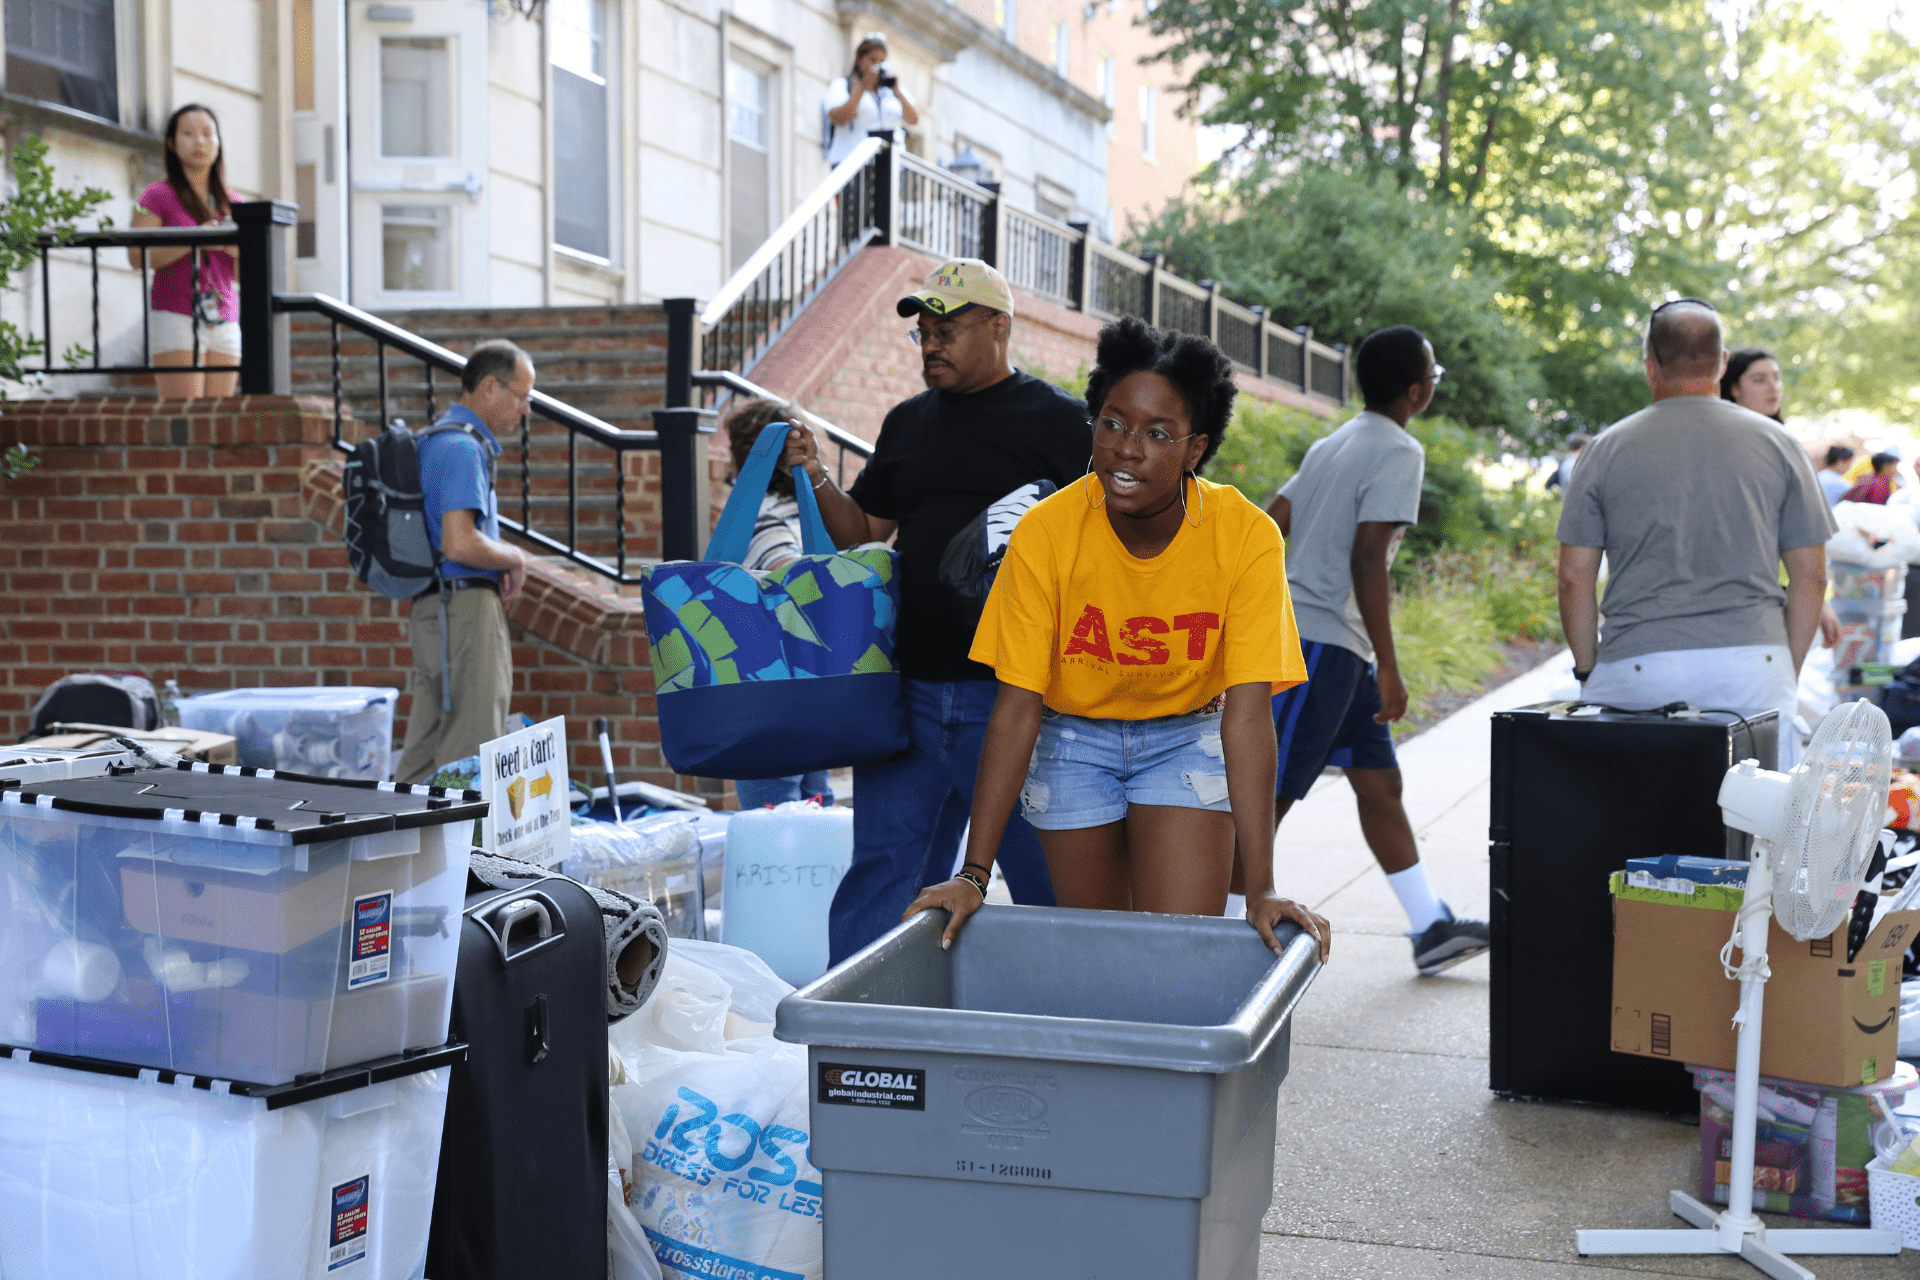 student wearing yellow AST shirt pushing a cart on the sidewalk during move-in